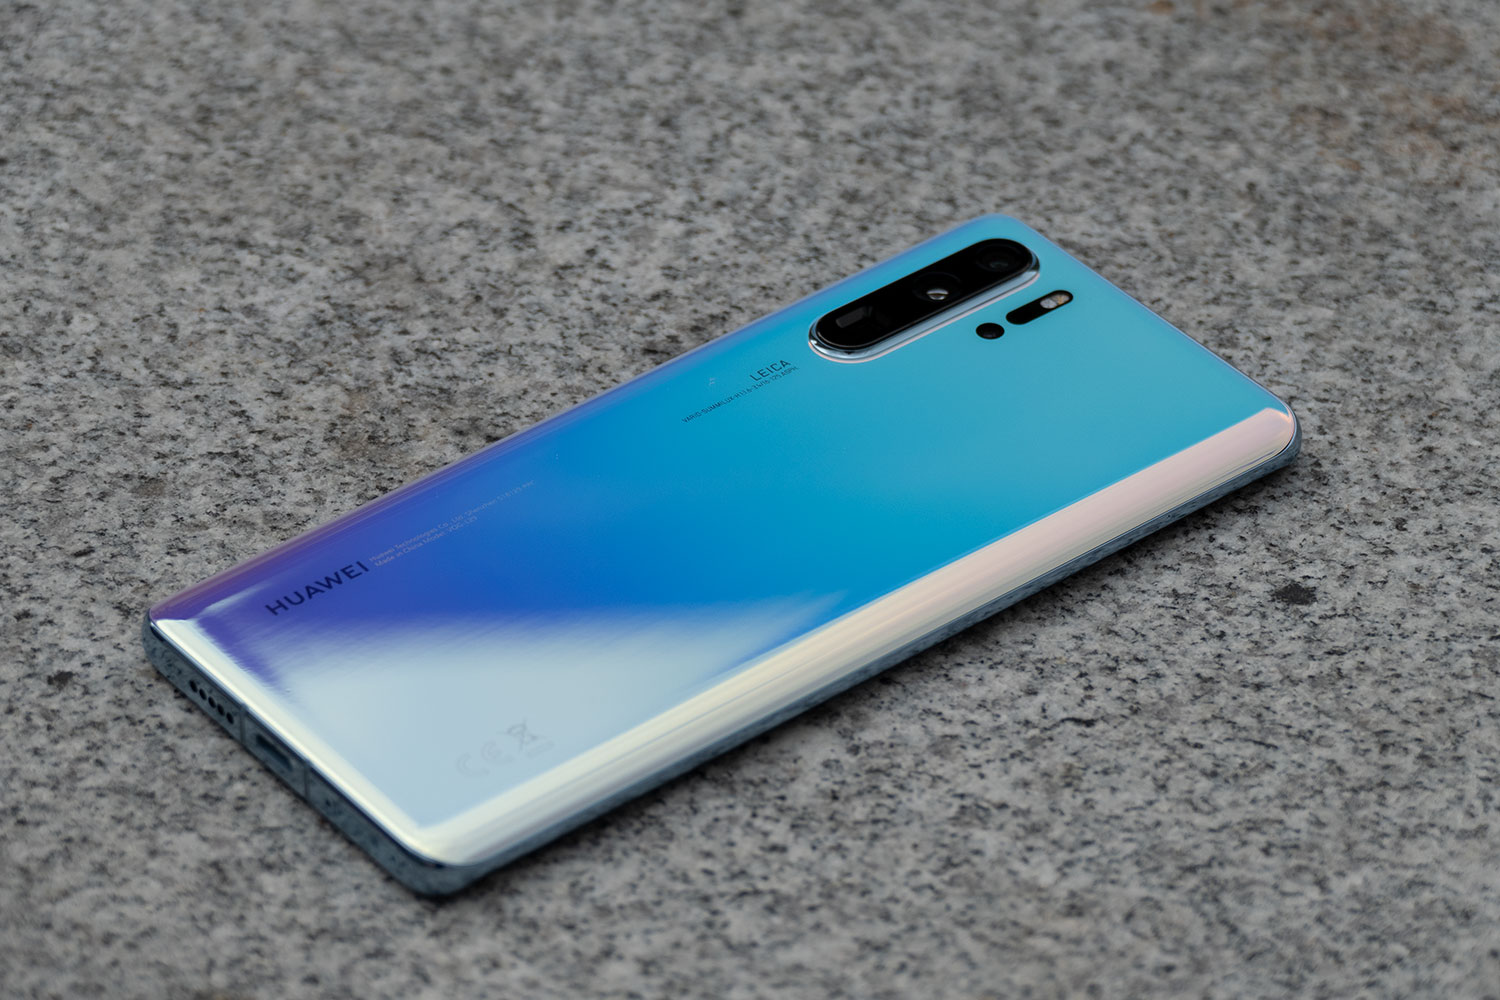 Huawei P30 Pro quick review: Four-camera play with a big bet on big zoom